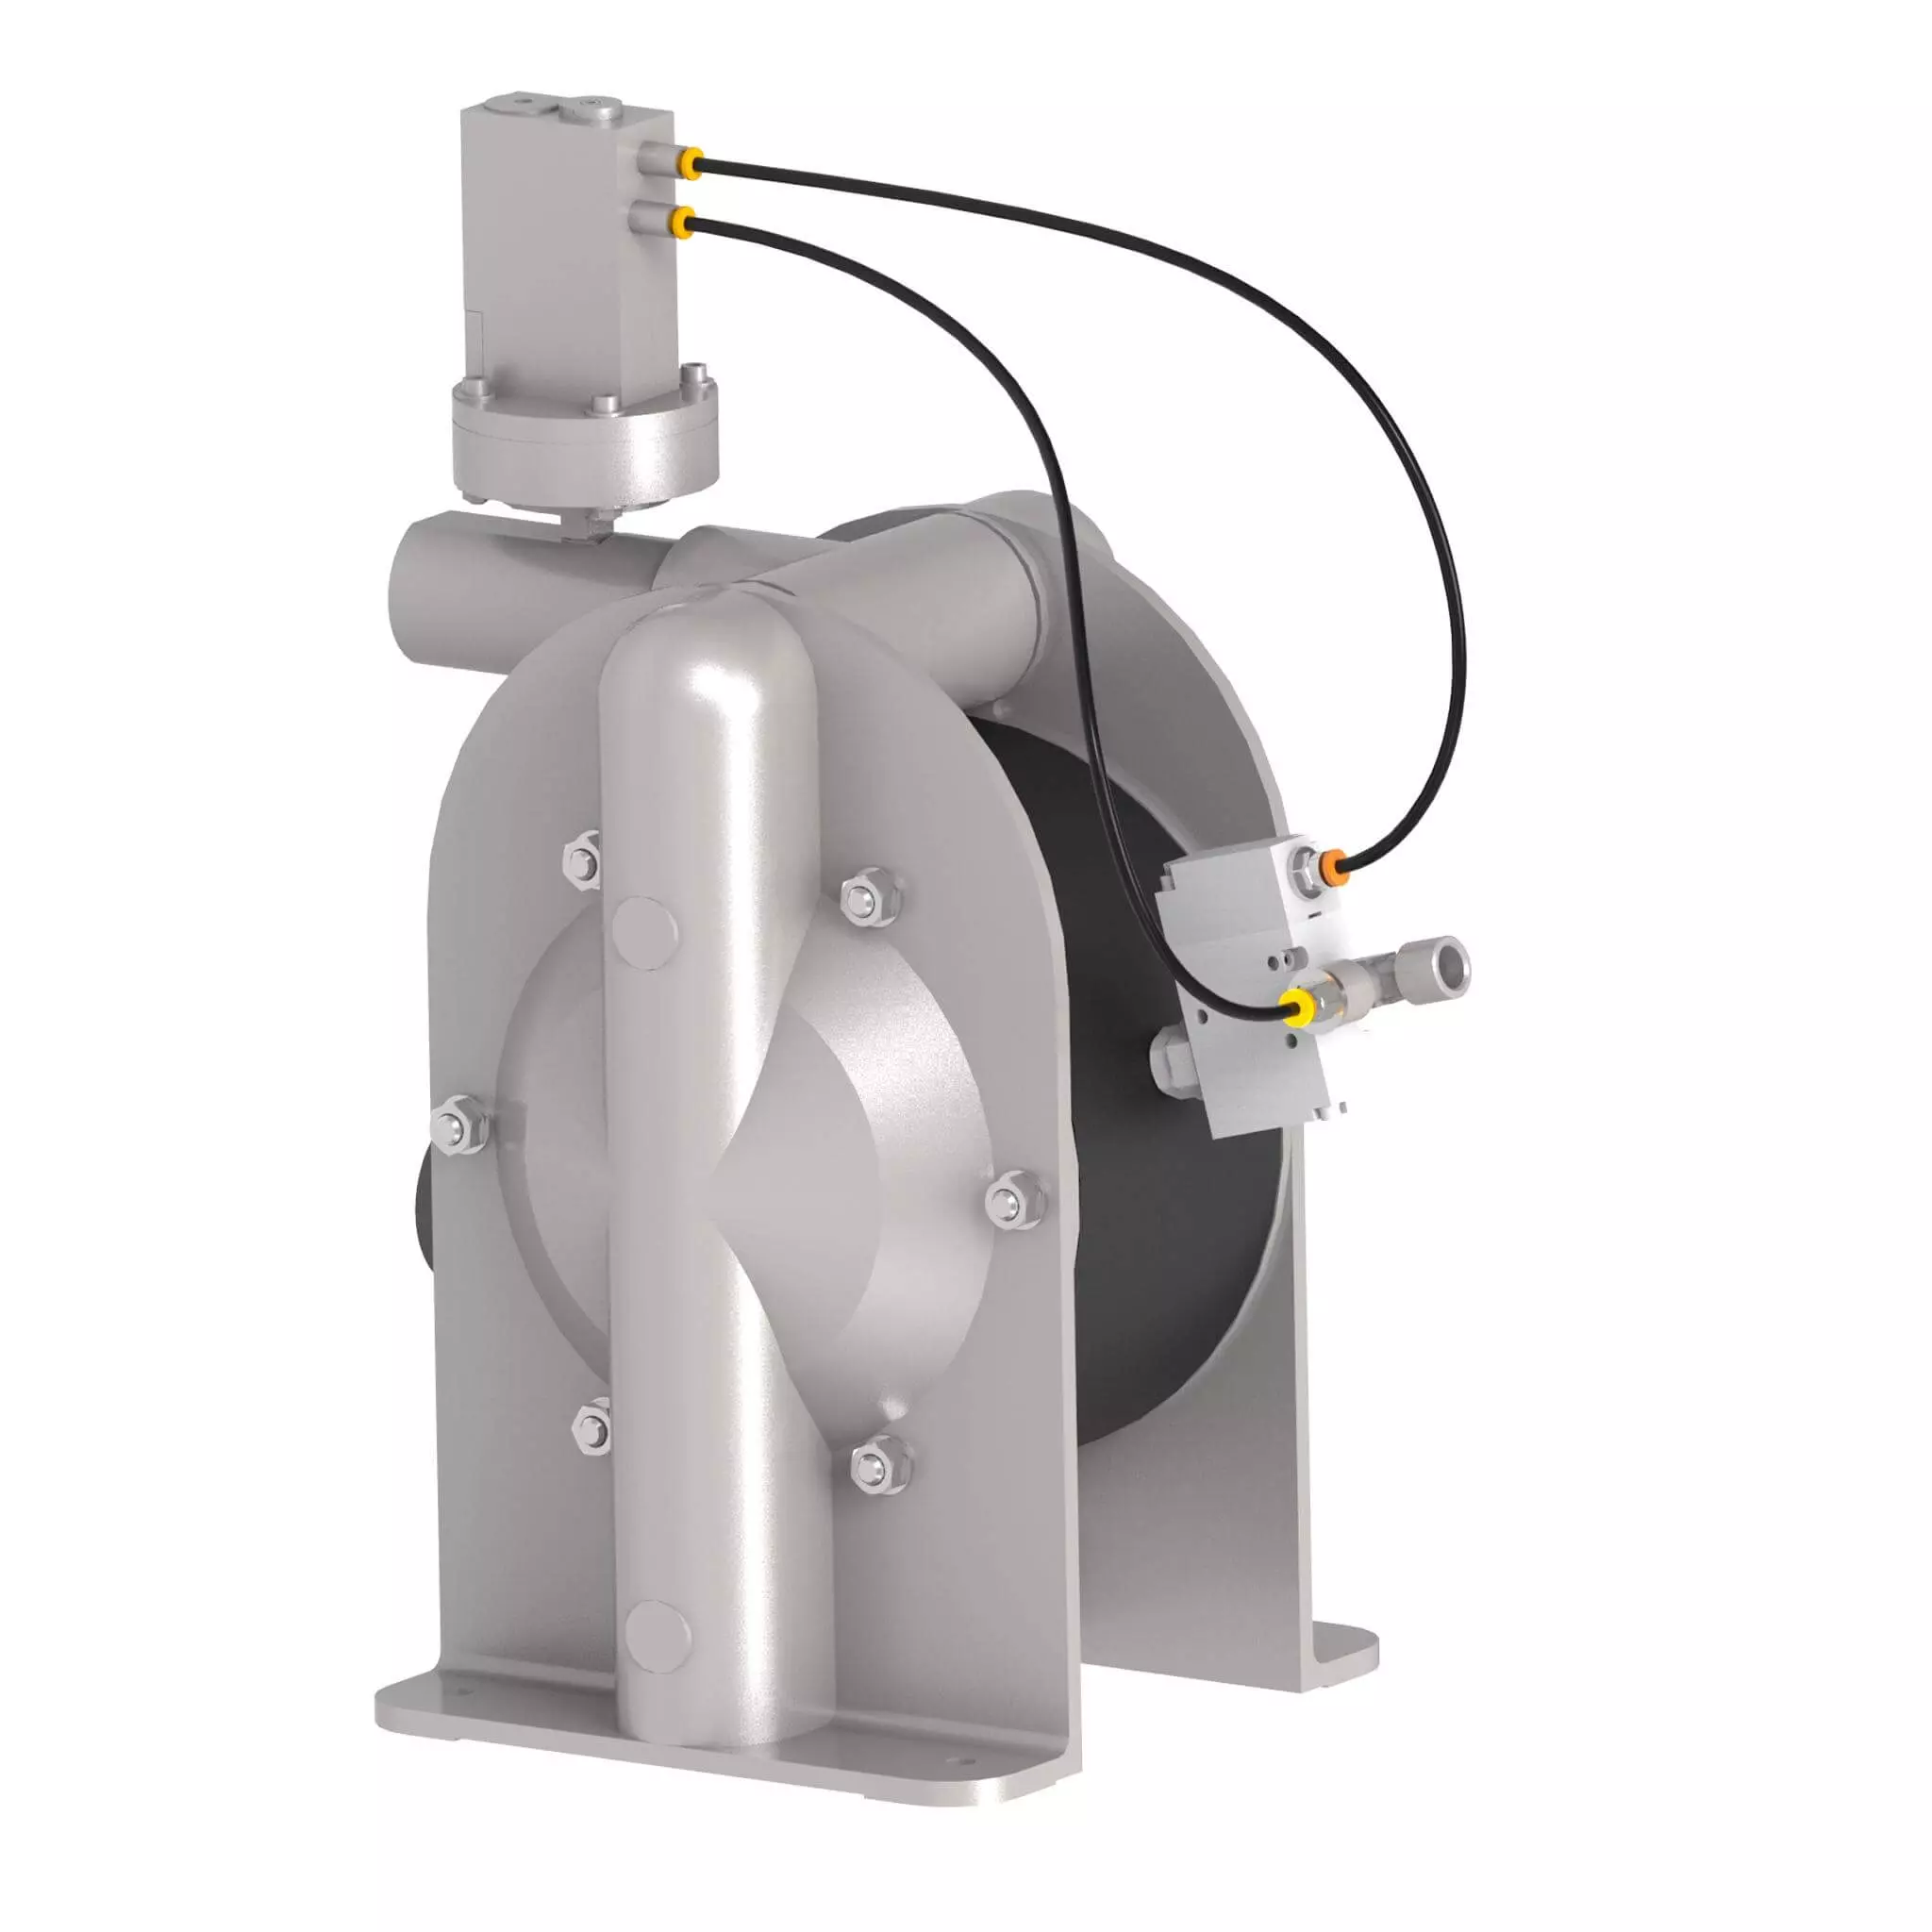 Pneumatic Dry-Run & Dead Head Protection Systems (PDRN, PDHR, PDHS)